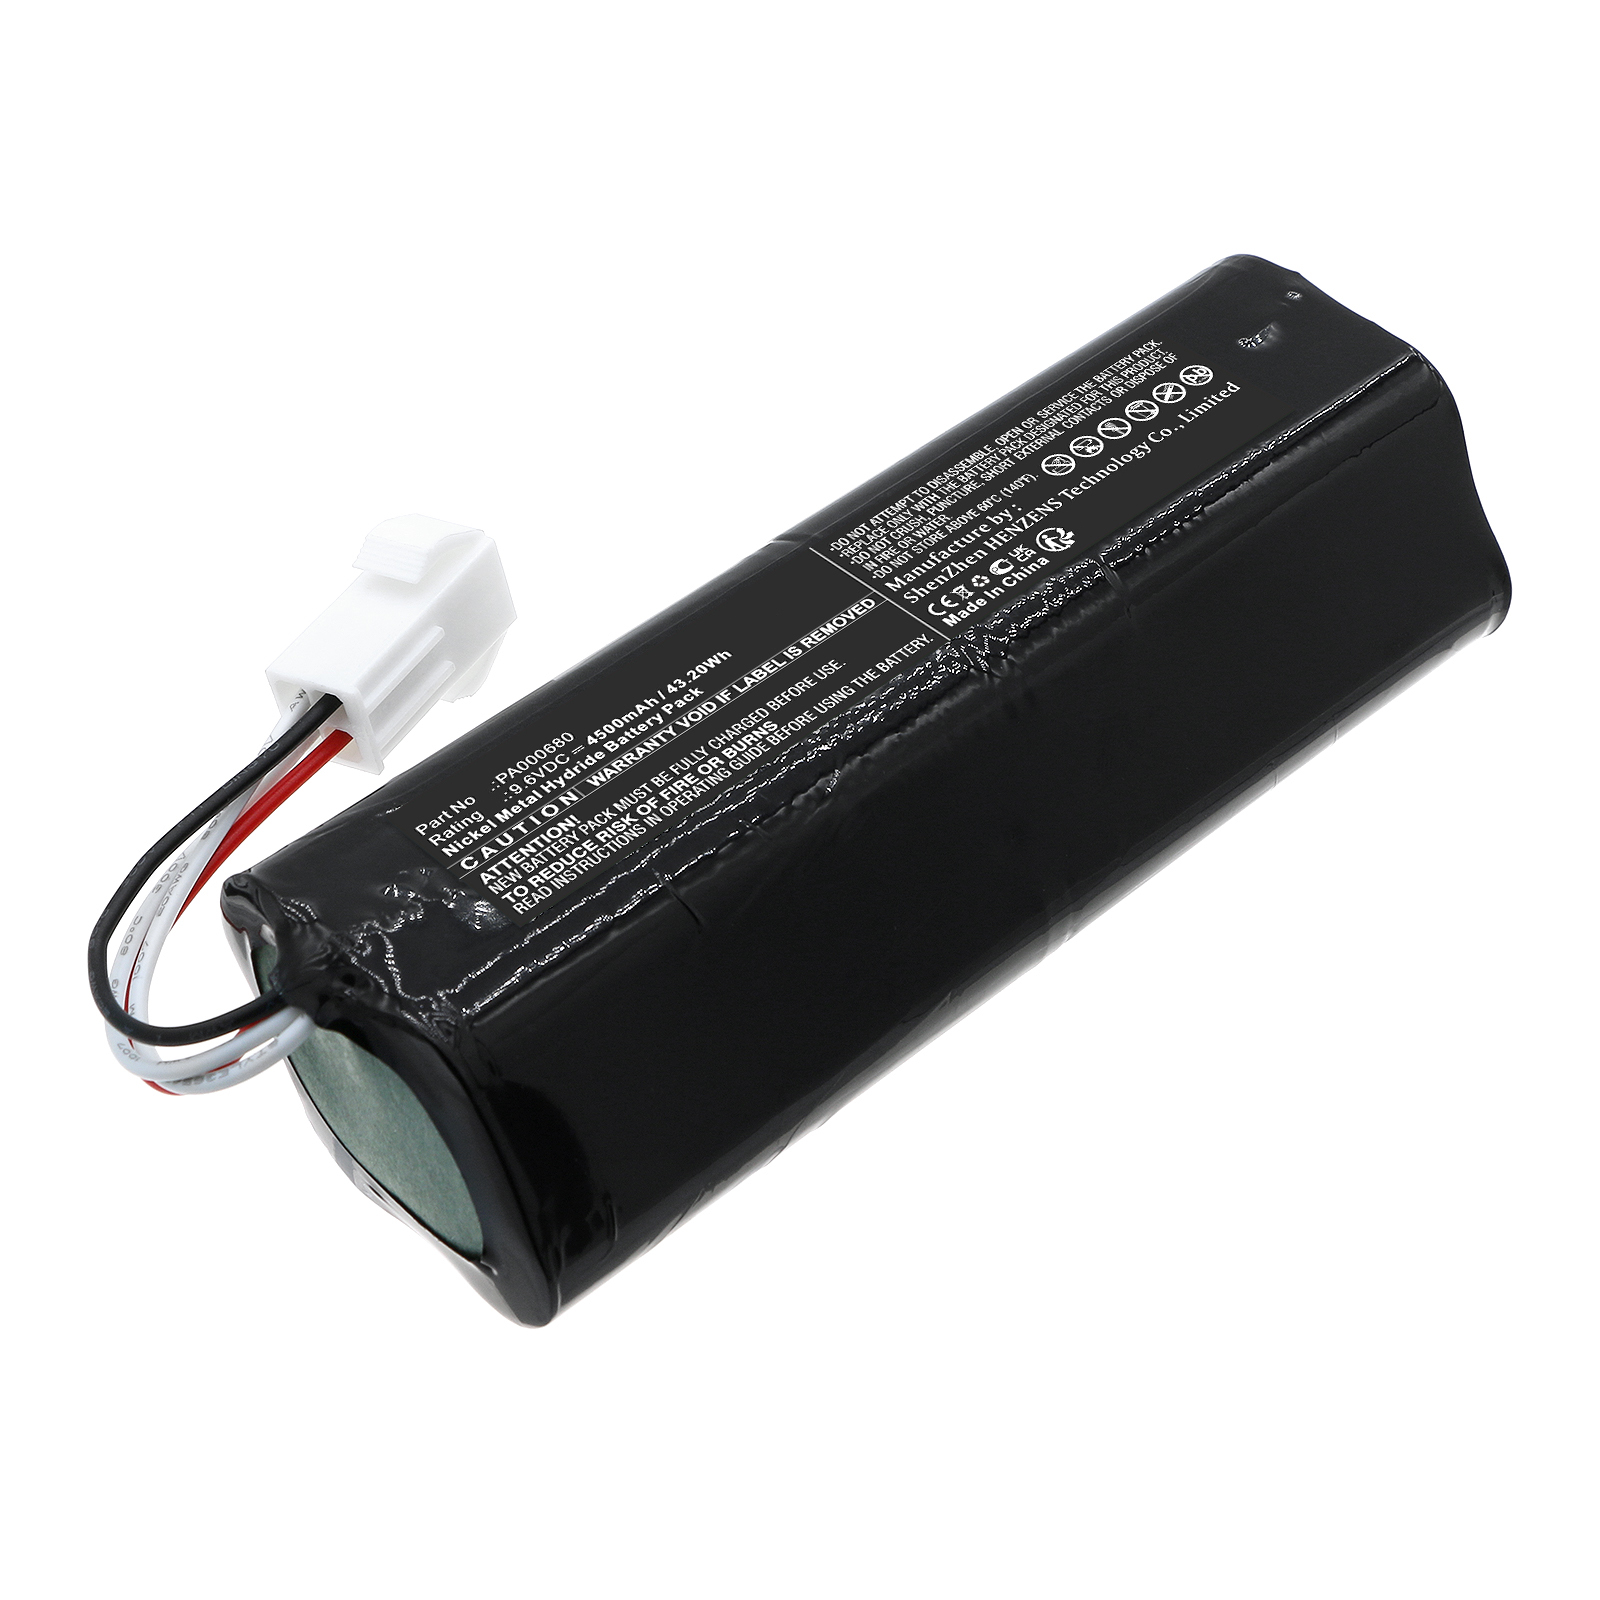 Synergy Digital Medical Battery, Compatible with PM Atemschutz PA000680 Medical Battery (Ni-MH, 9.6V, 4500mAh)